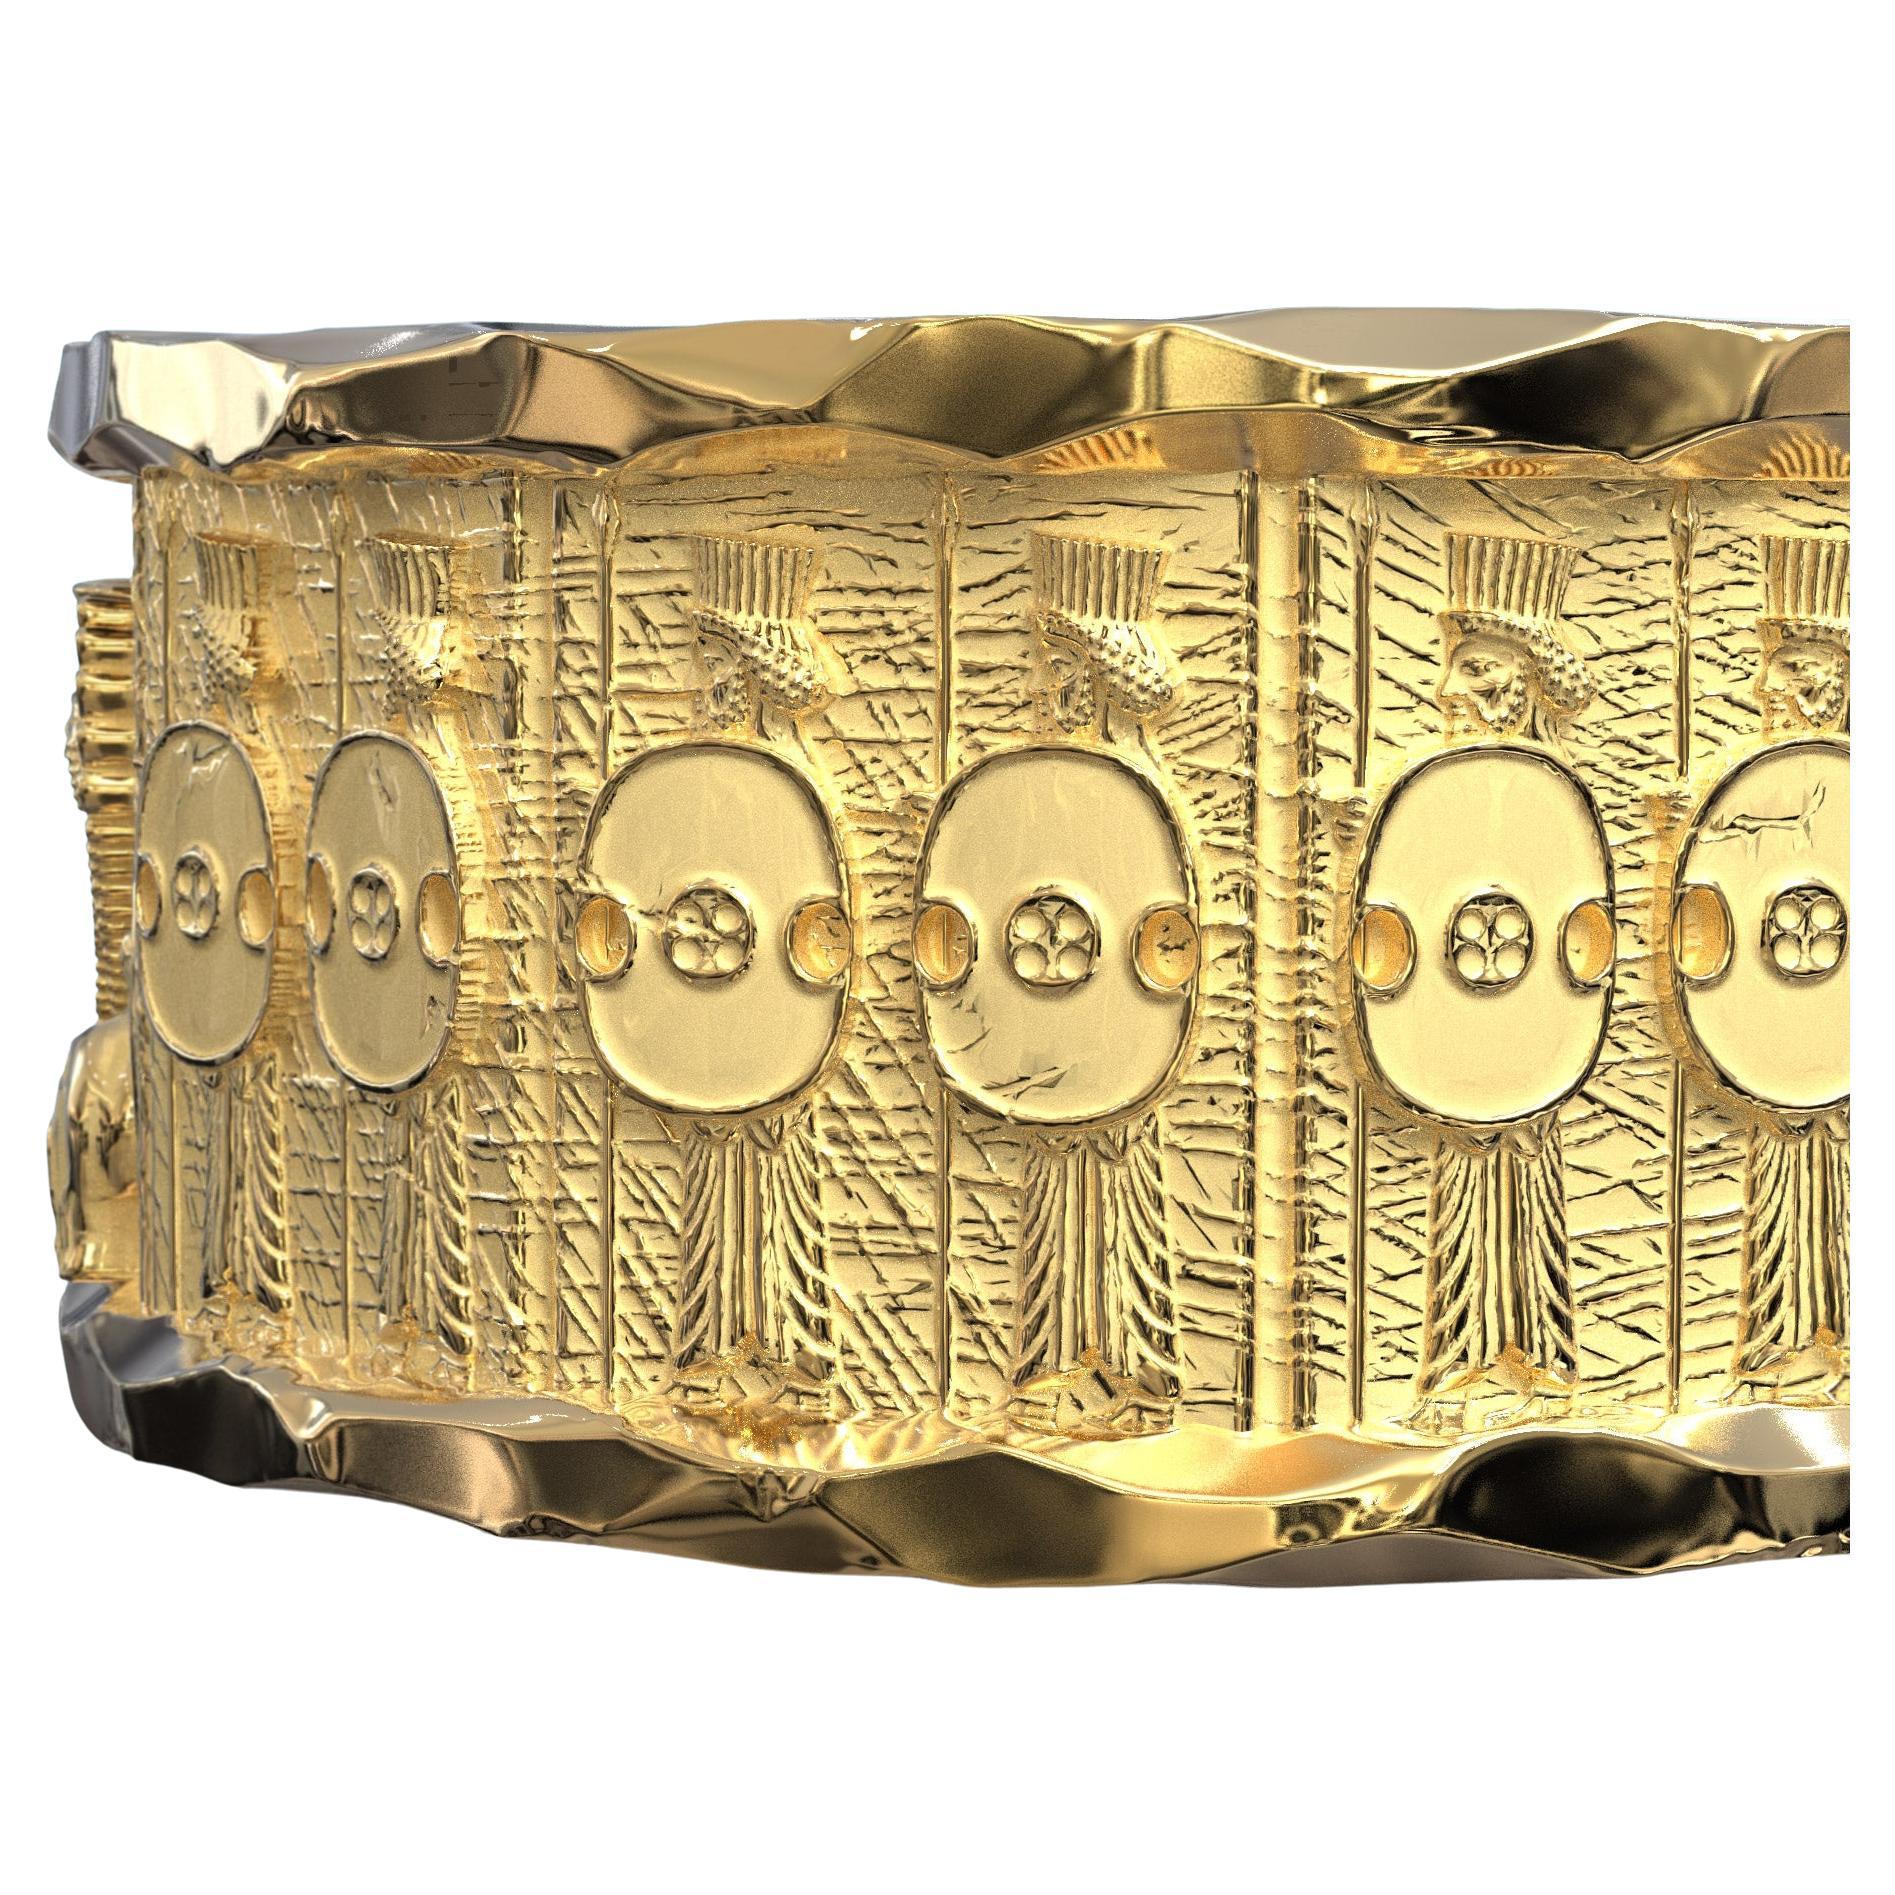 For Sale:  Italian 14k Gold Ring with Temple of Persepolis Bas-Reliefs, Persian Style Ring